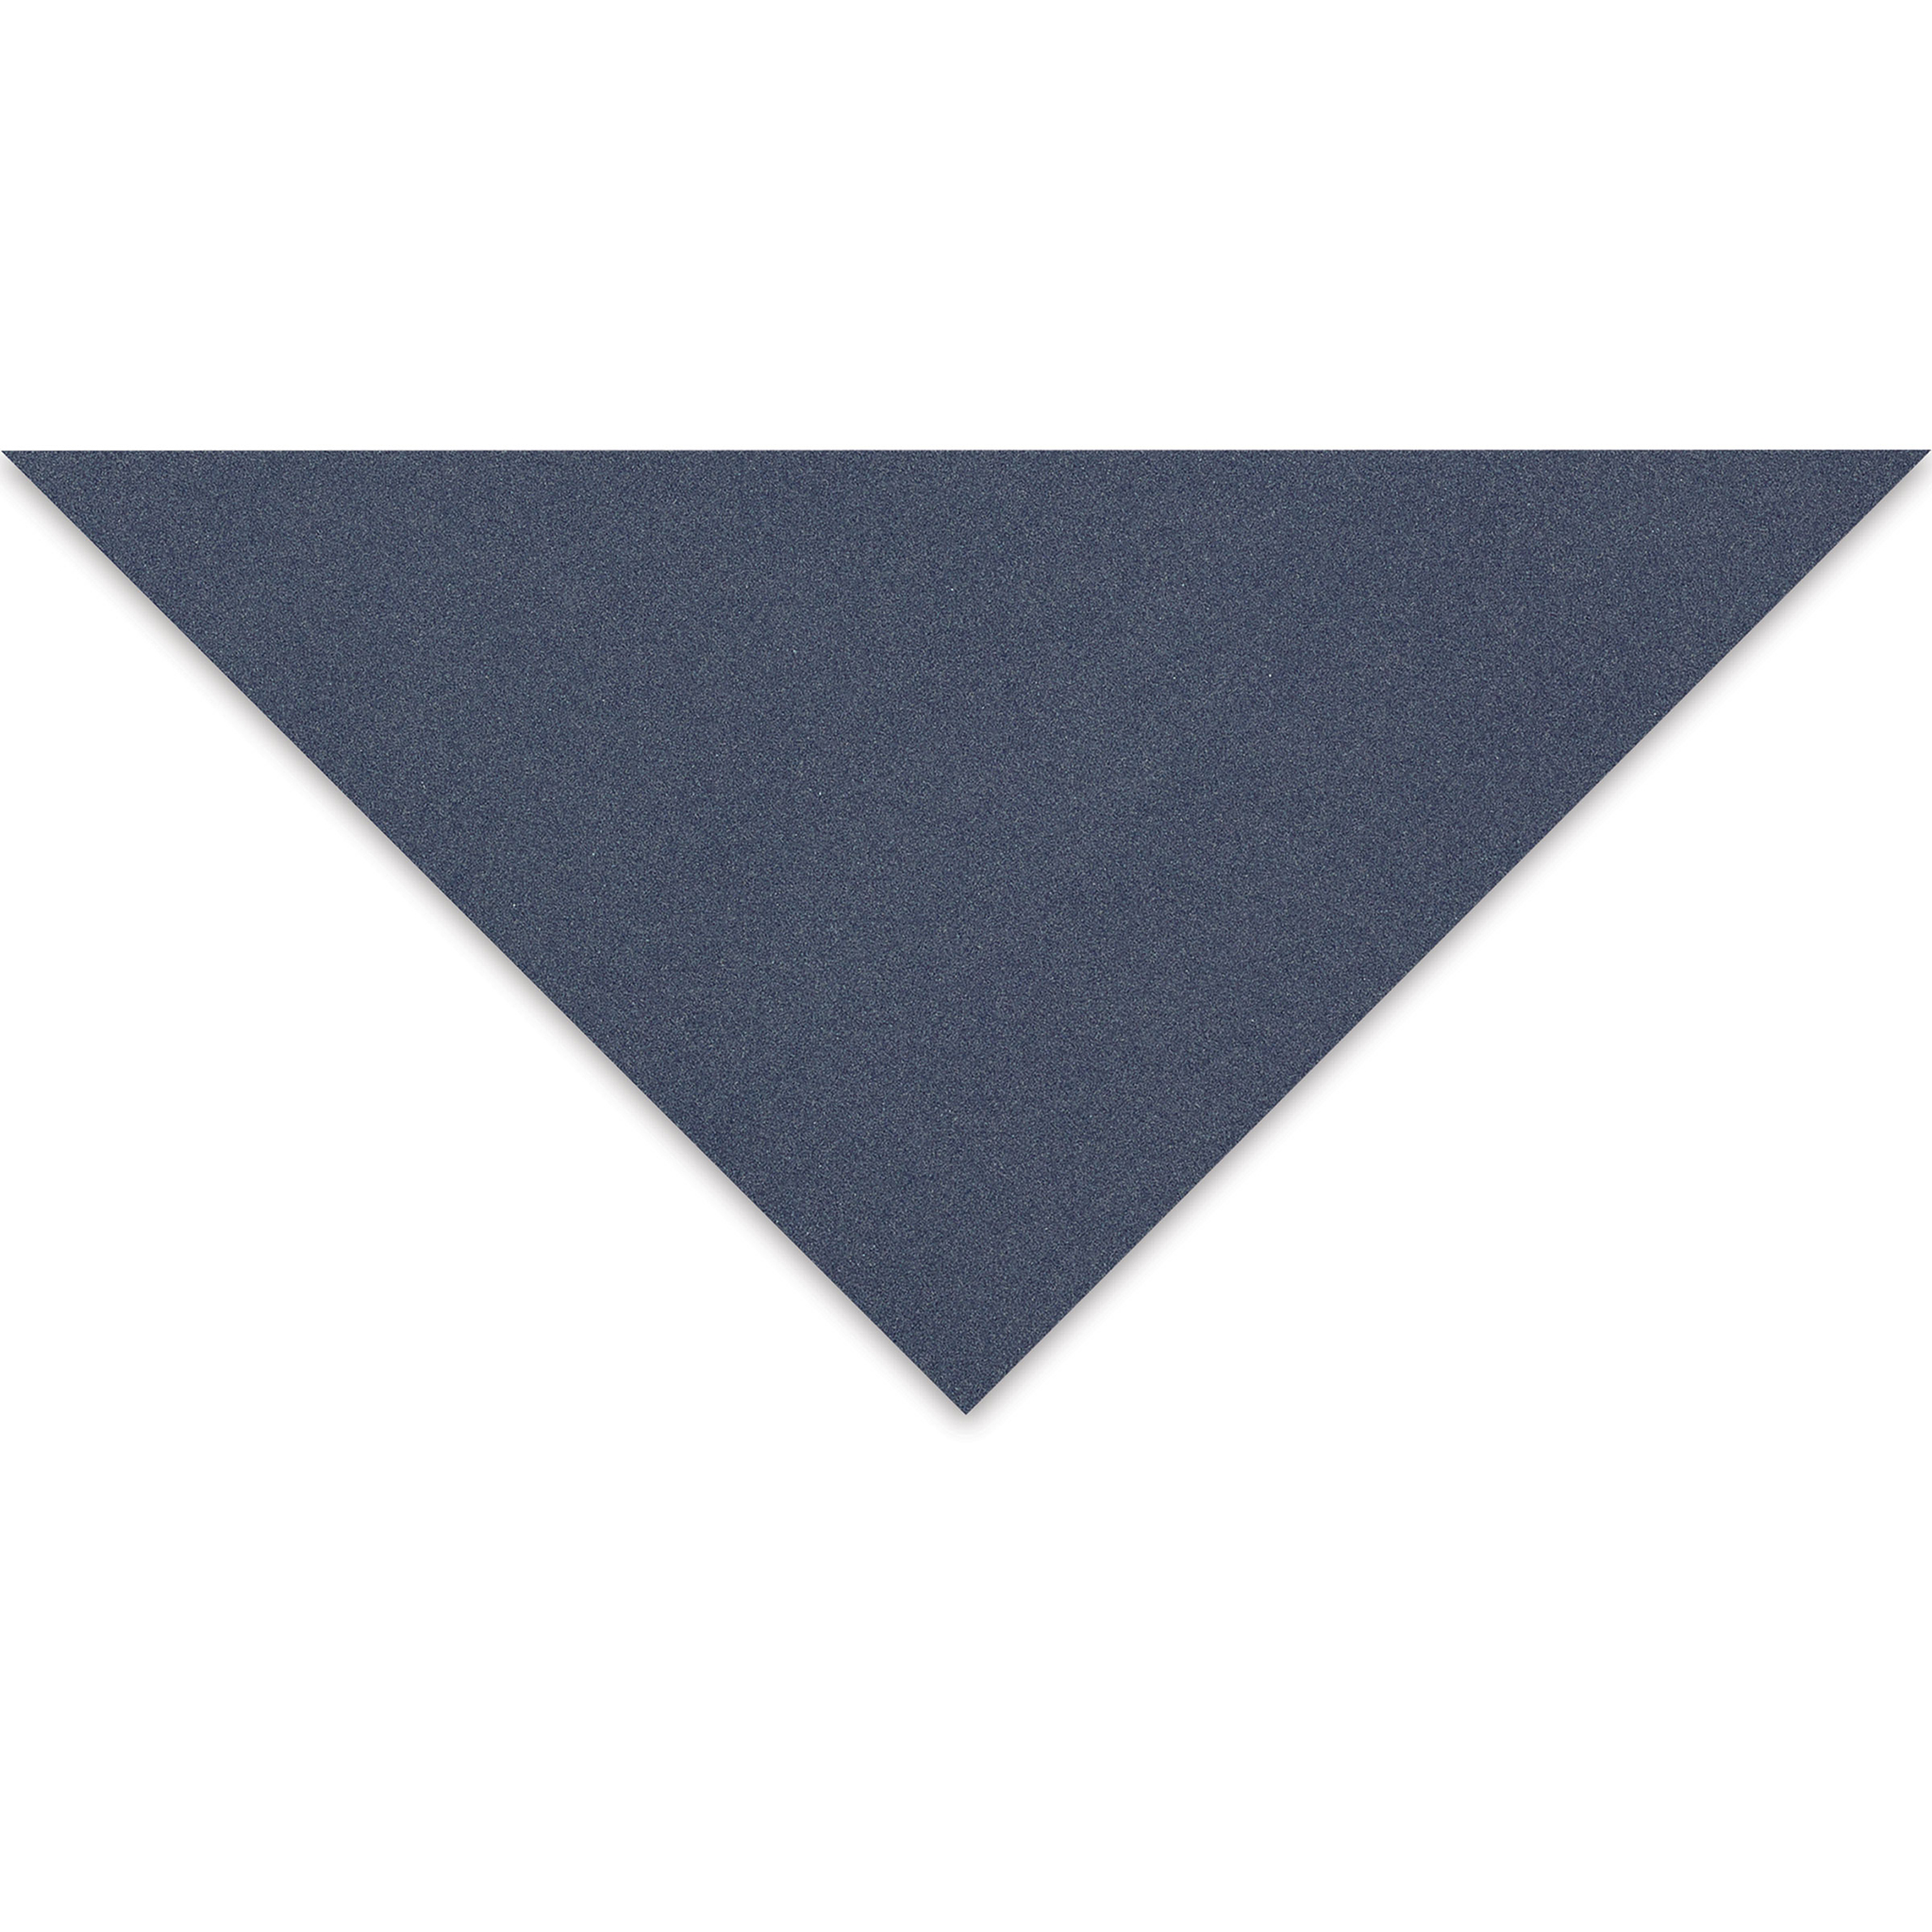 296019 - Clairefontaine Pastelmat - Sheets - Dark Grey - Five Sheets - 360g  - 27 1/2 x 39 1/2